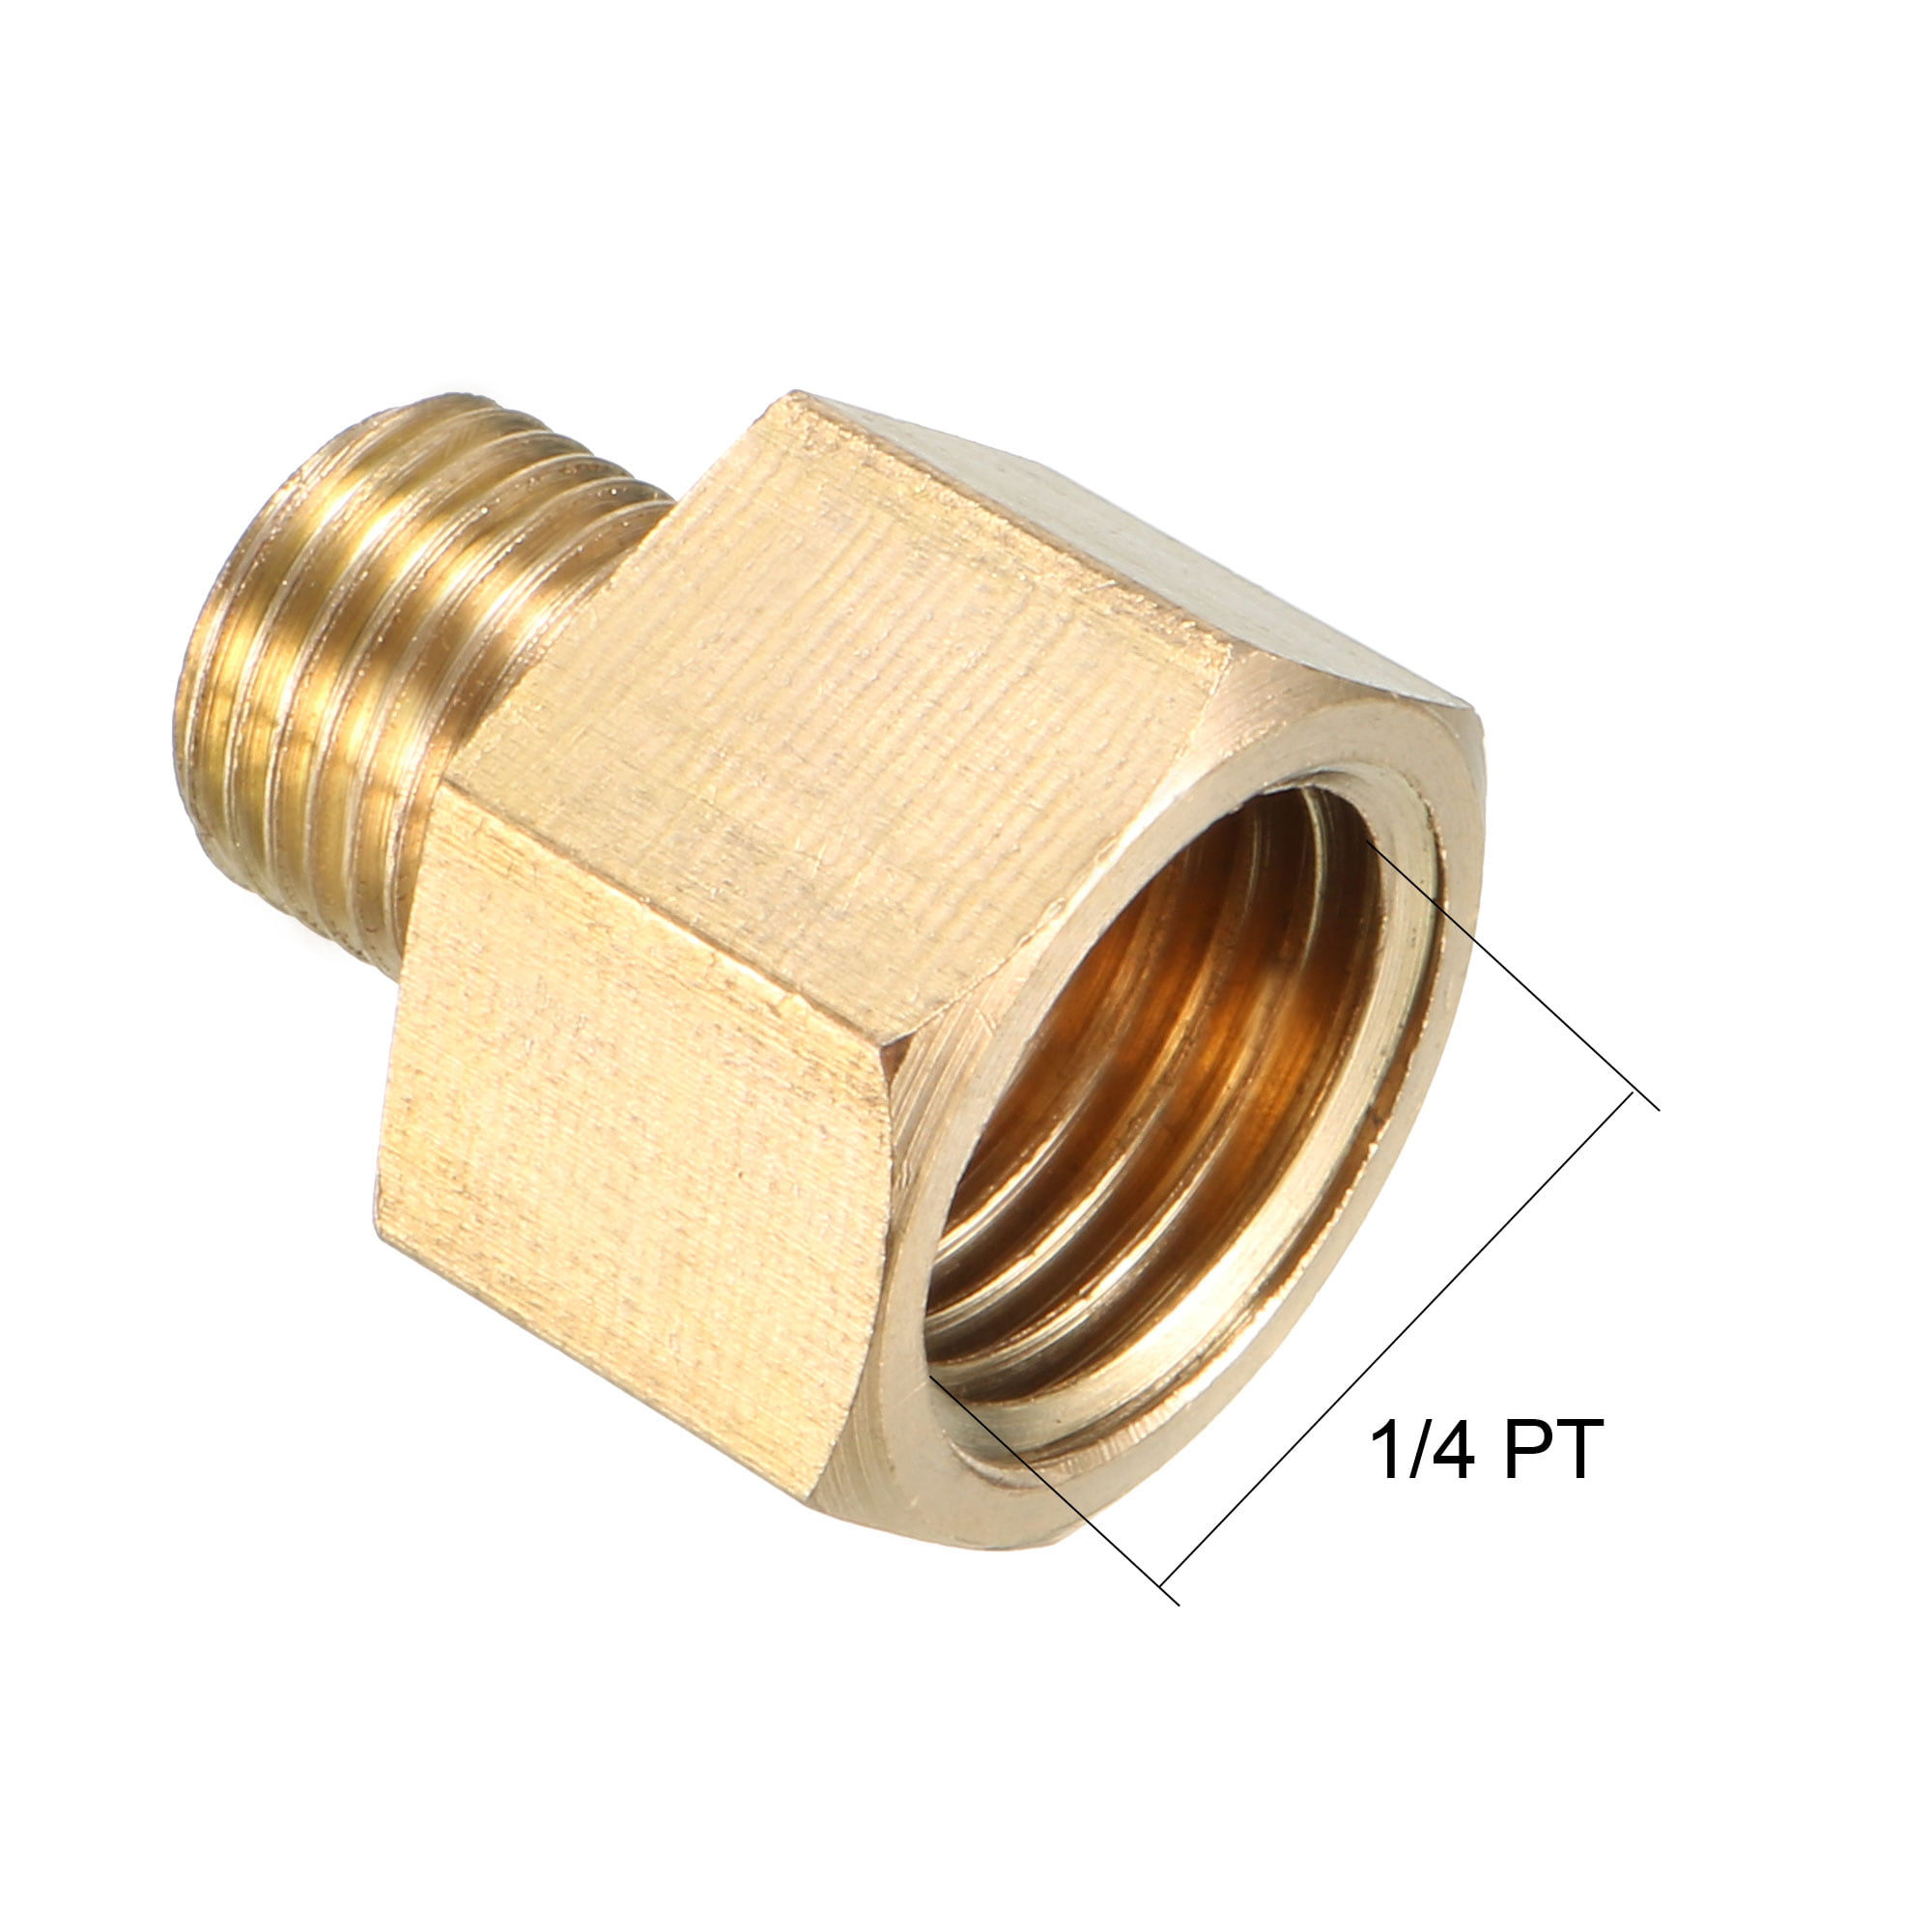 1 PACK FEMALE COUPLING  1/4" PORTS  BOTH SIDES 207P-4 BRASS FITTINGS 